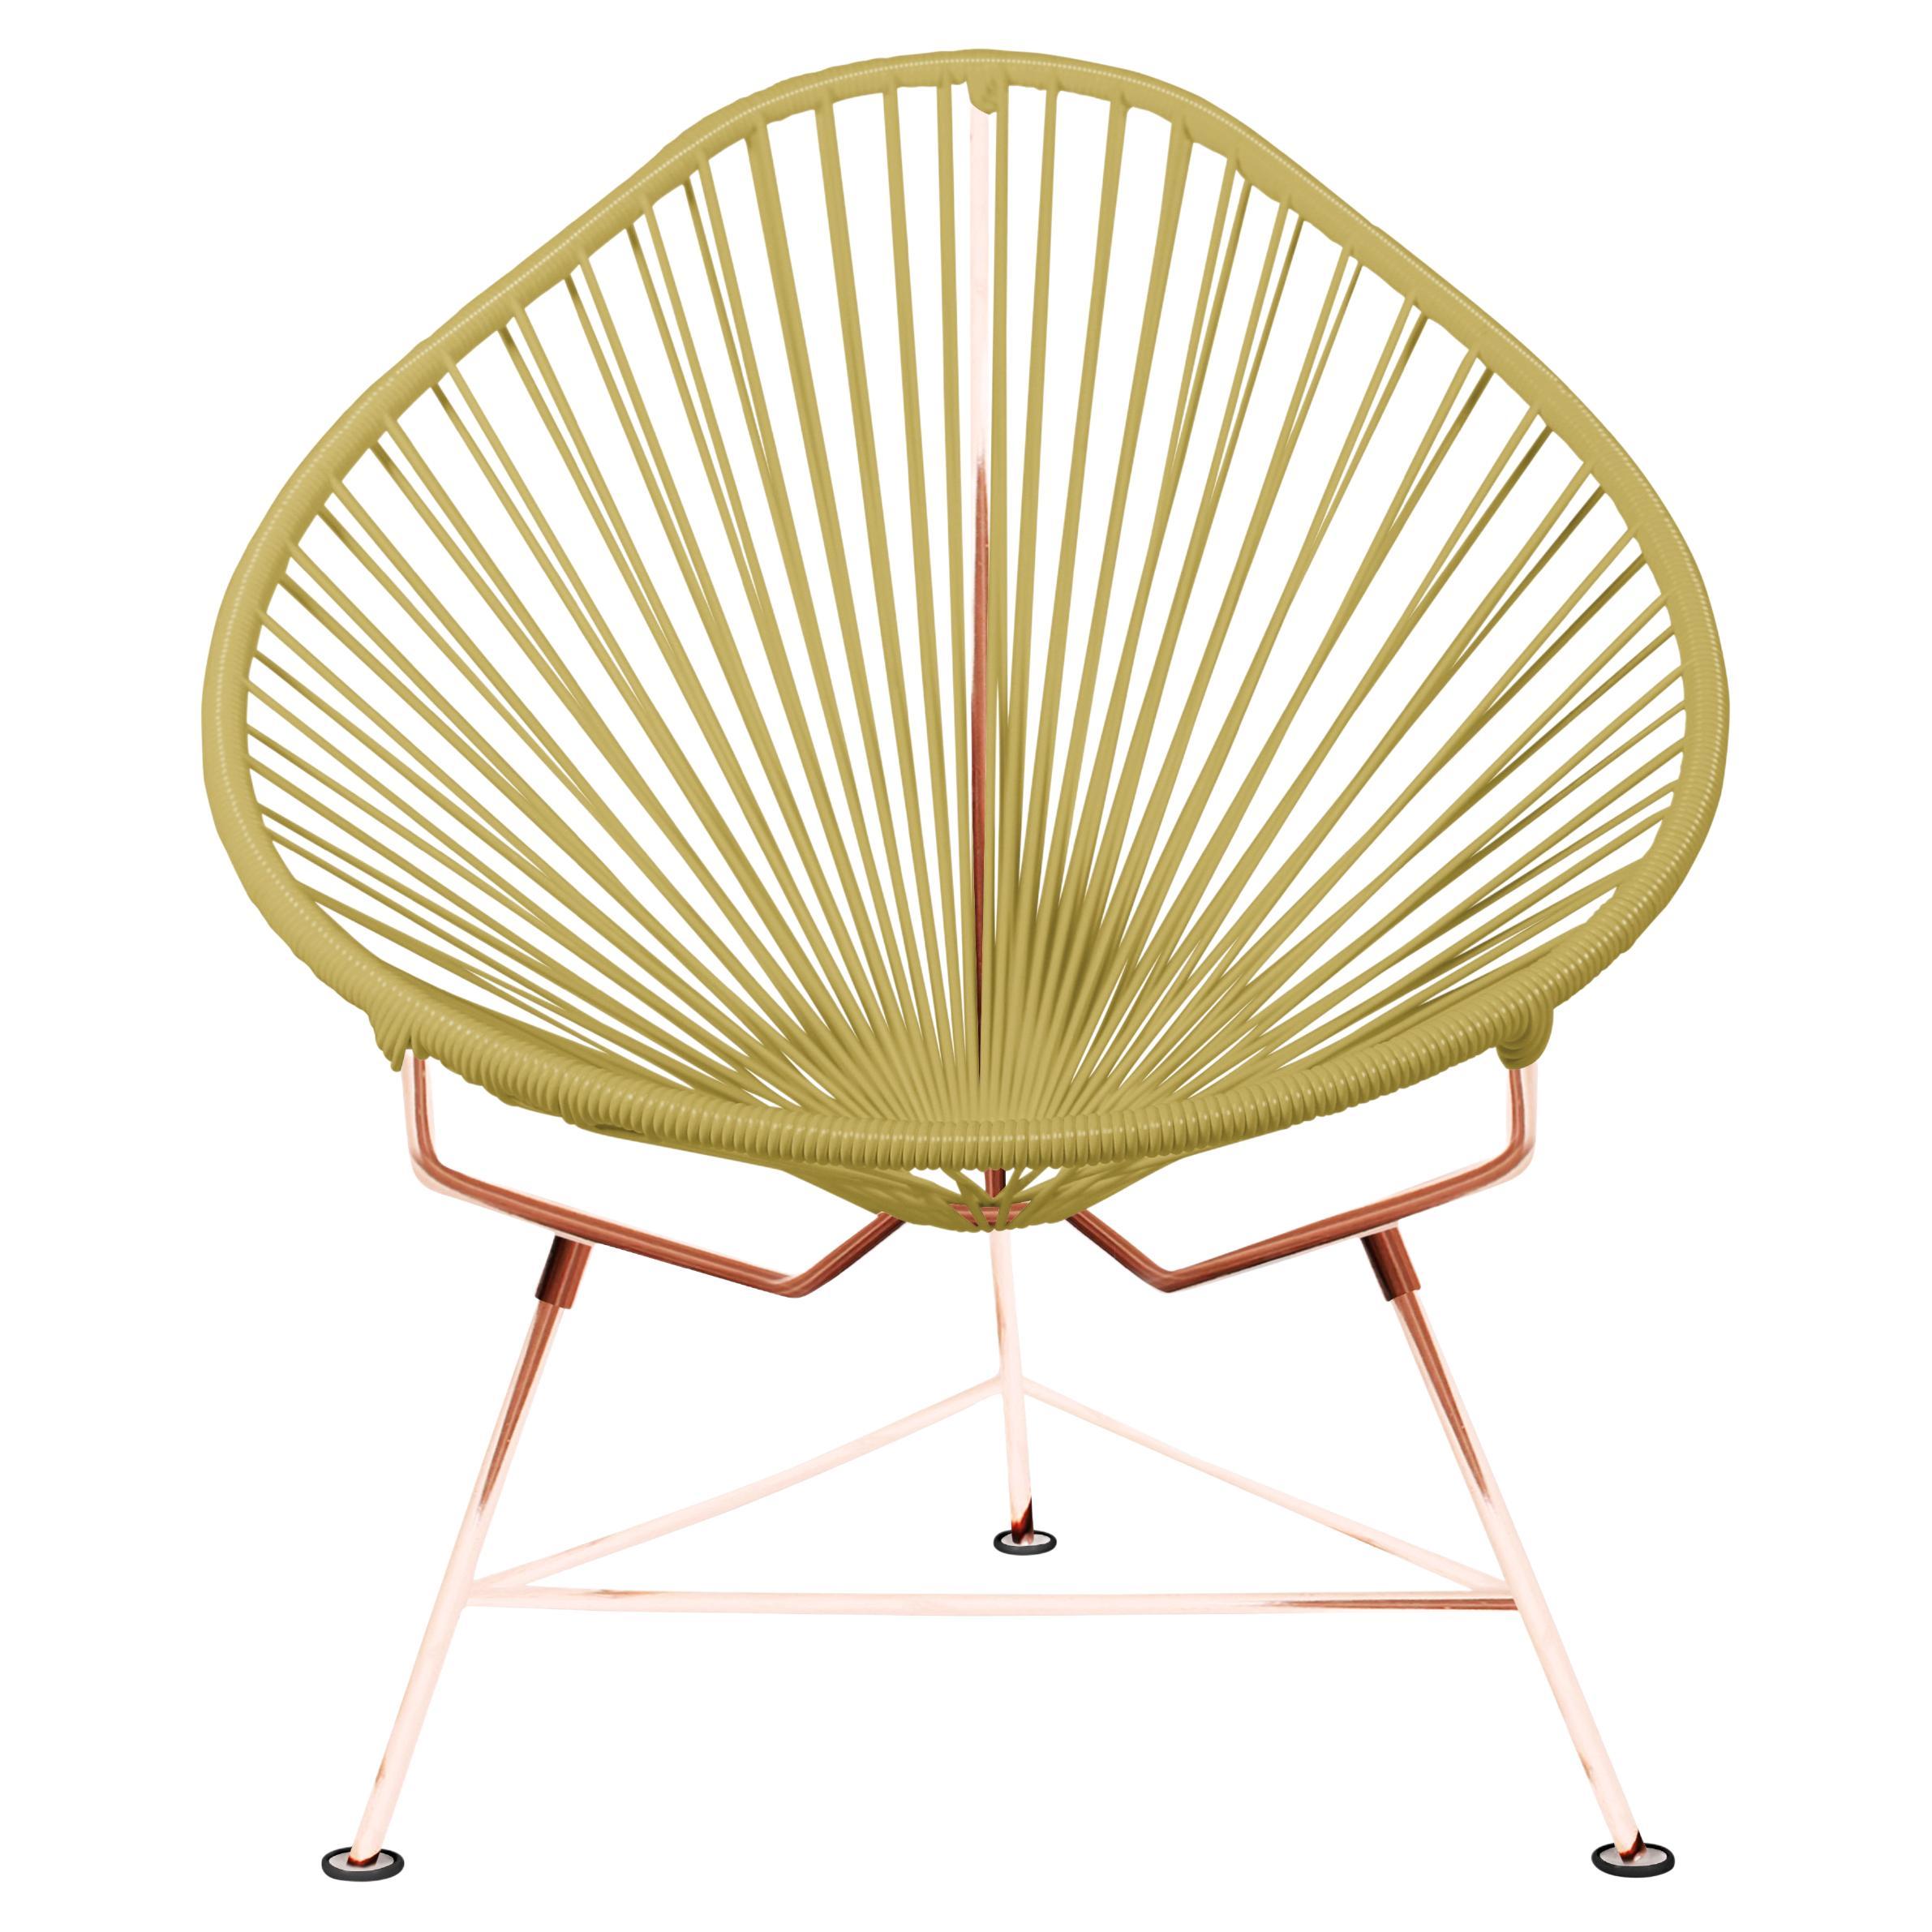 Innit Designs Acapulco Chair Gold Weave on Copper Frame